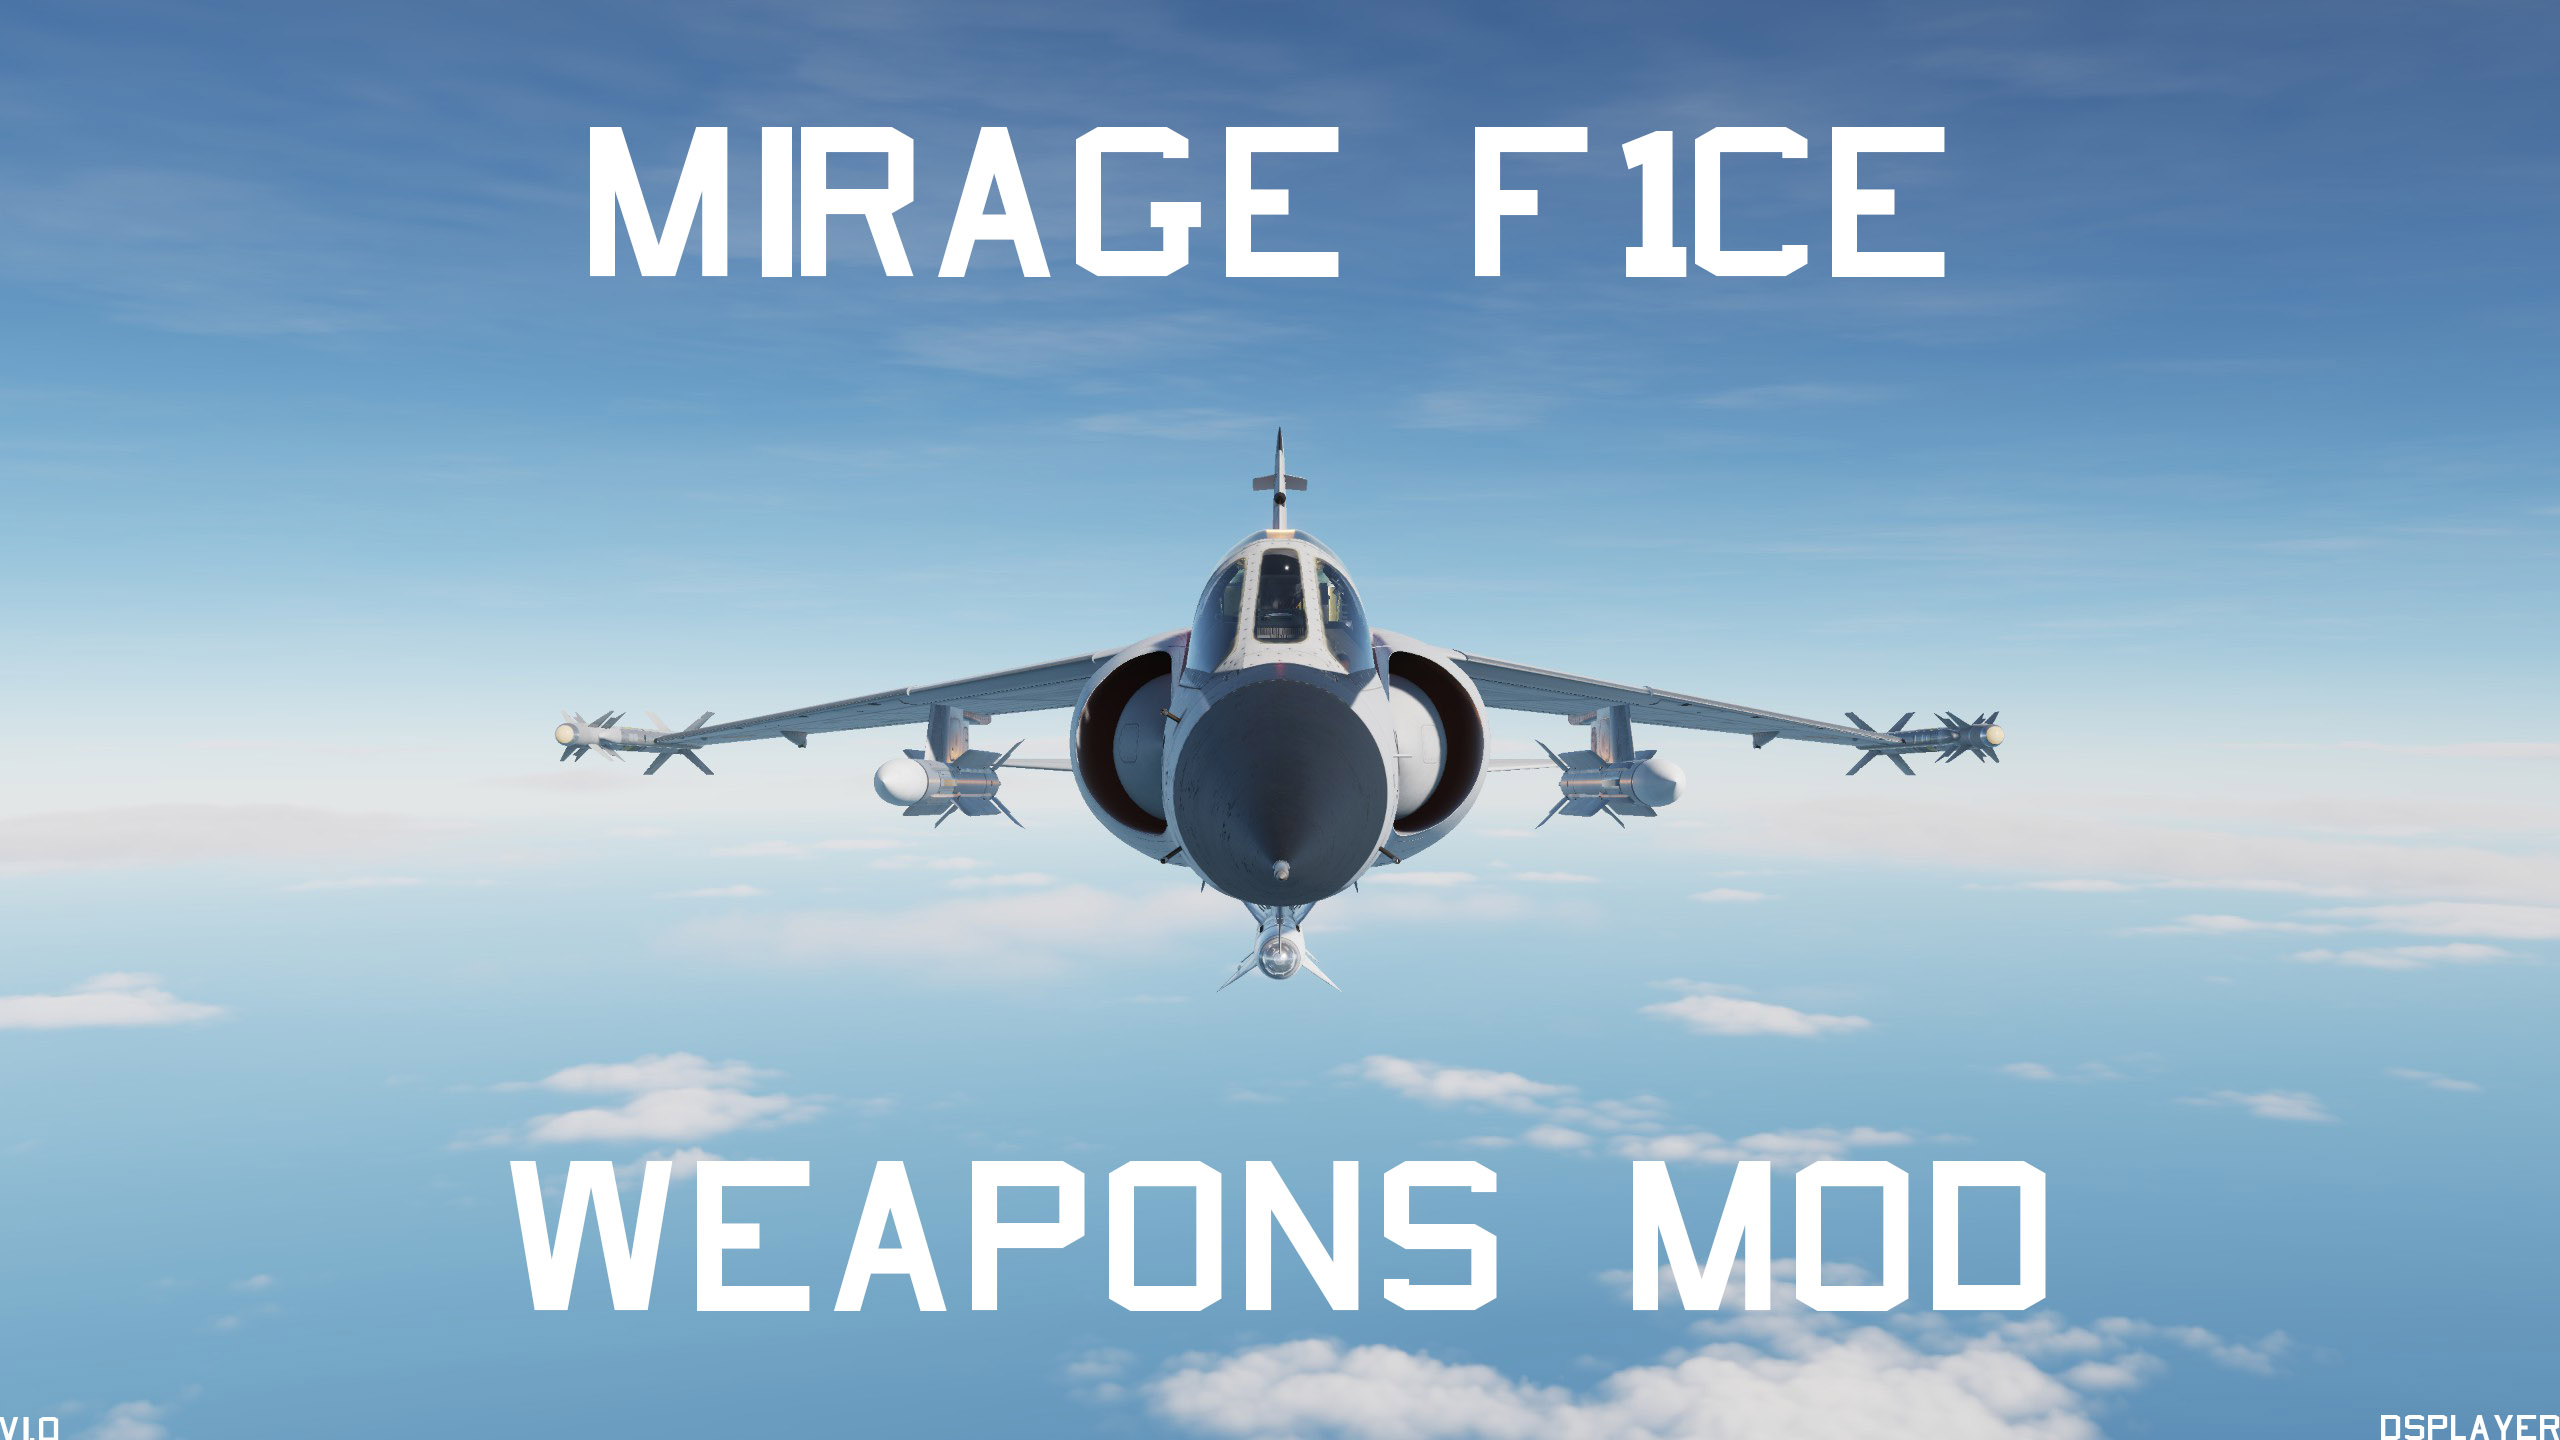 Mirage F1CE Weapons Mod (V1.0)